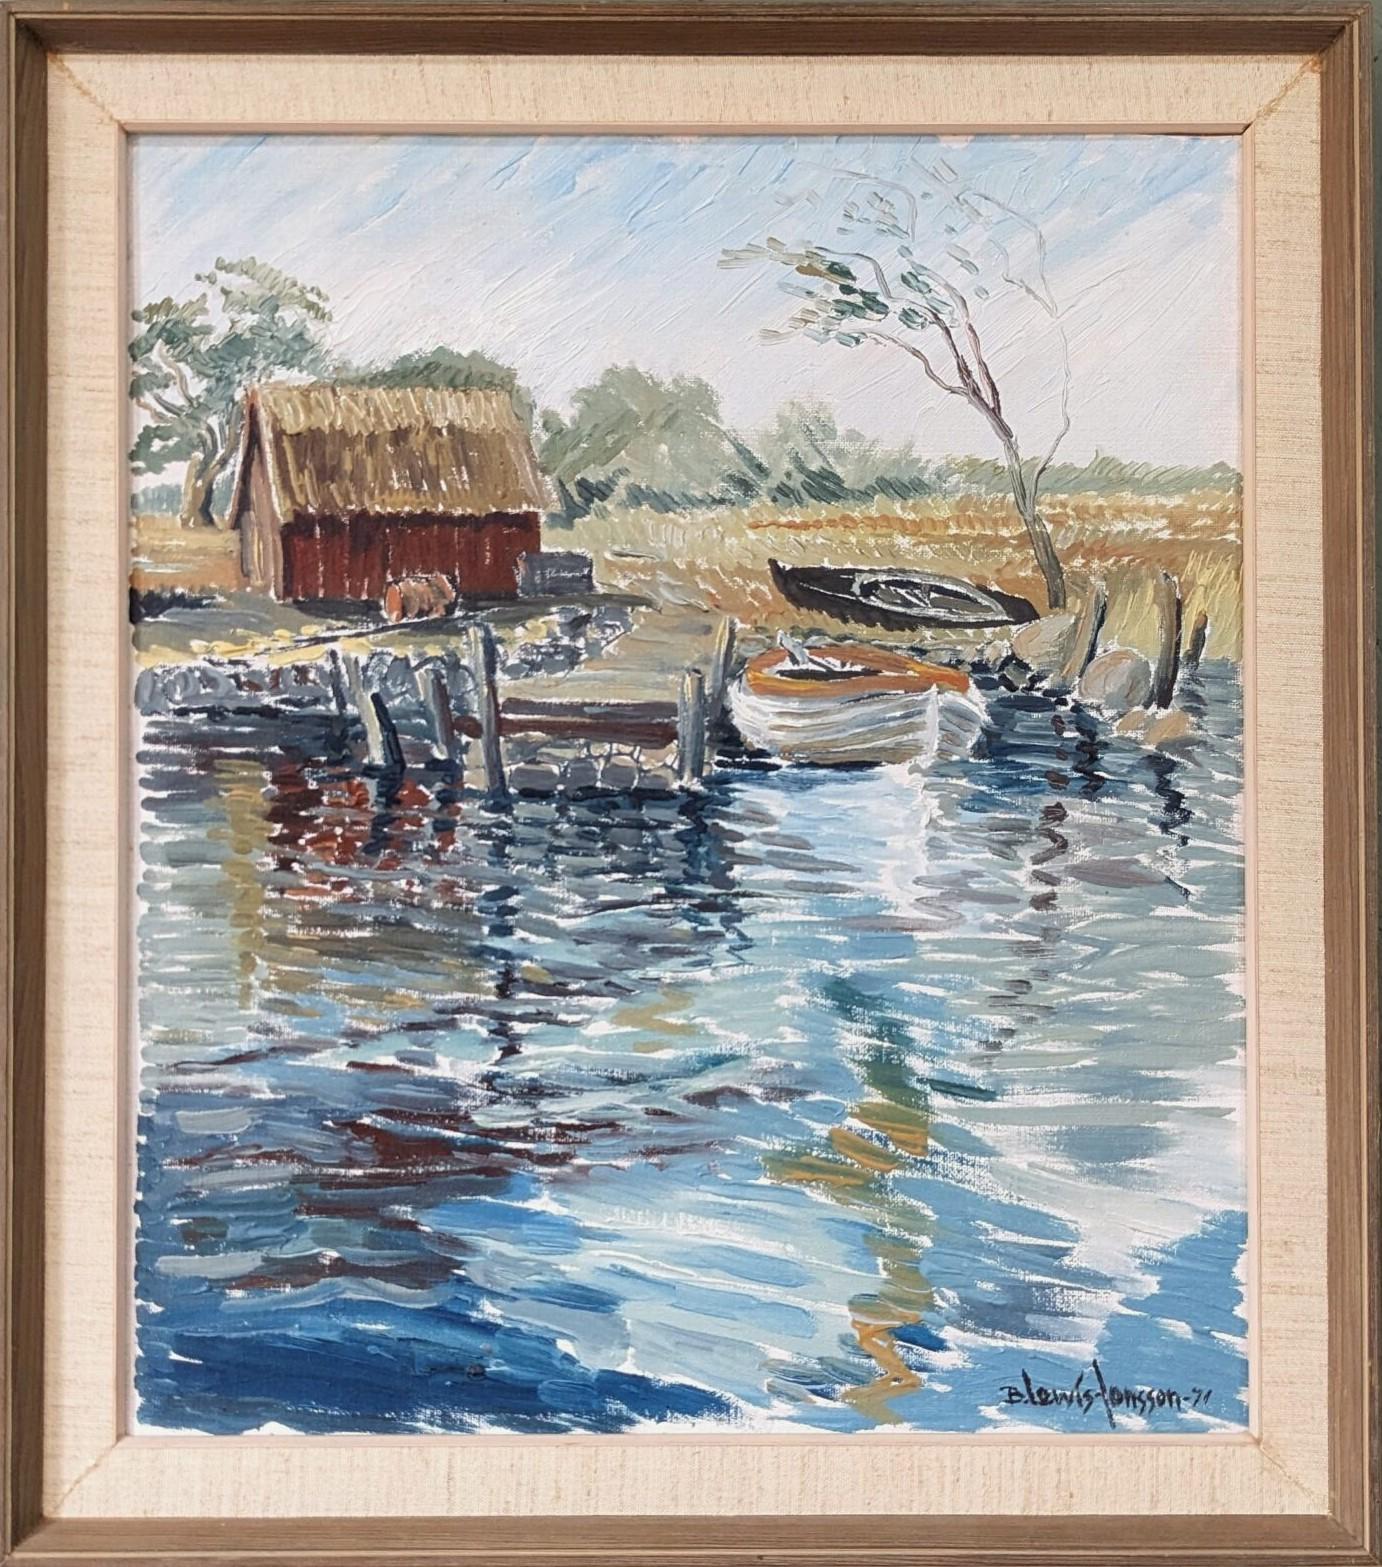 Unknown Landscape Painting - 1971 Mid-Century Modern Swedish Framed River Landscape Oil Painting - Boathouse